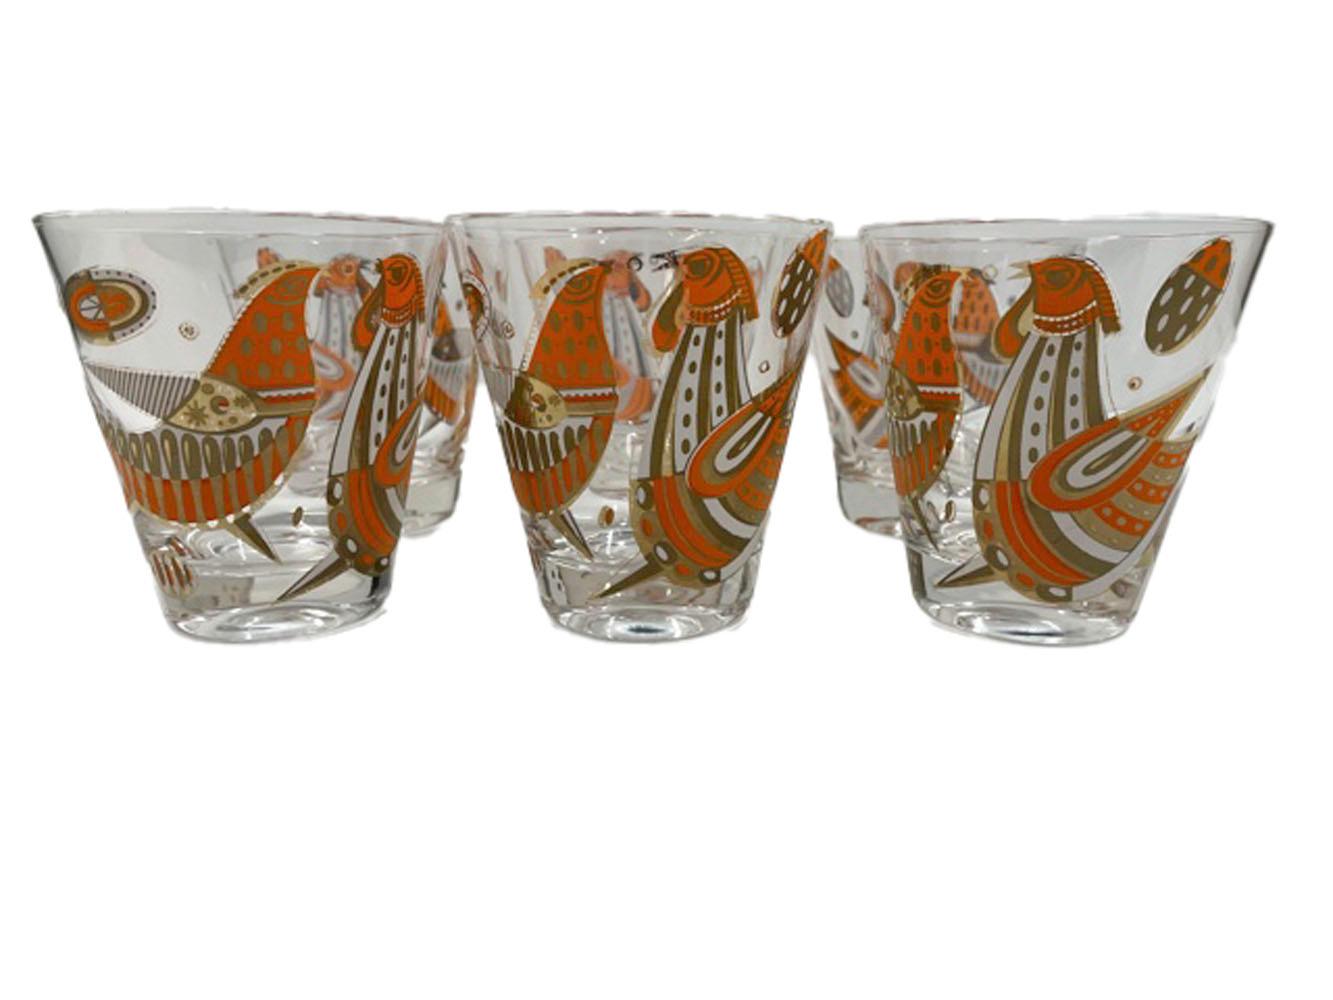 Set of six Mid-Century Modern double old fashioned cocktail glasses each decorated with a pair of courting fowl in orange and white enamel with 22k gold.